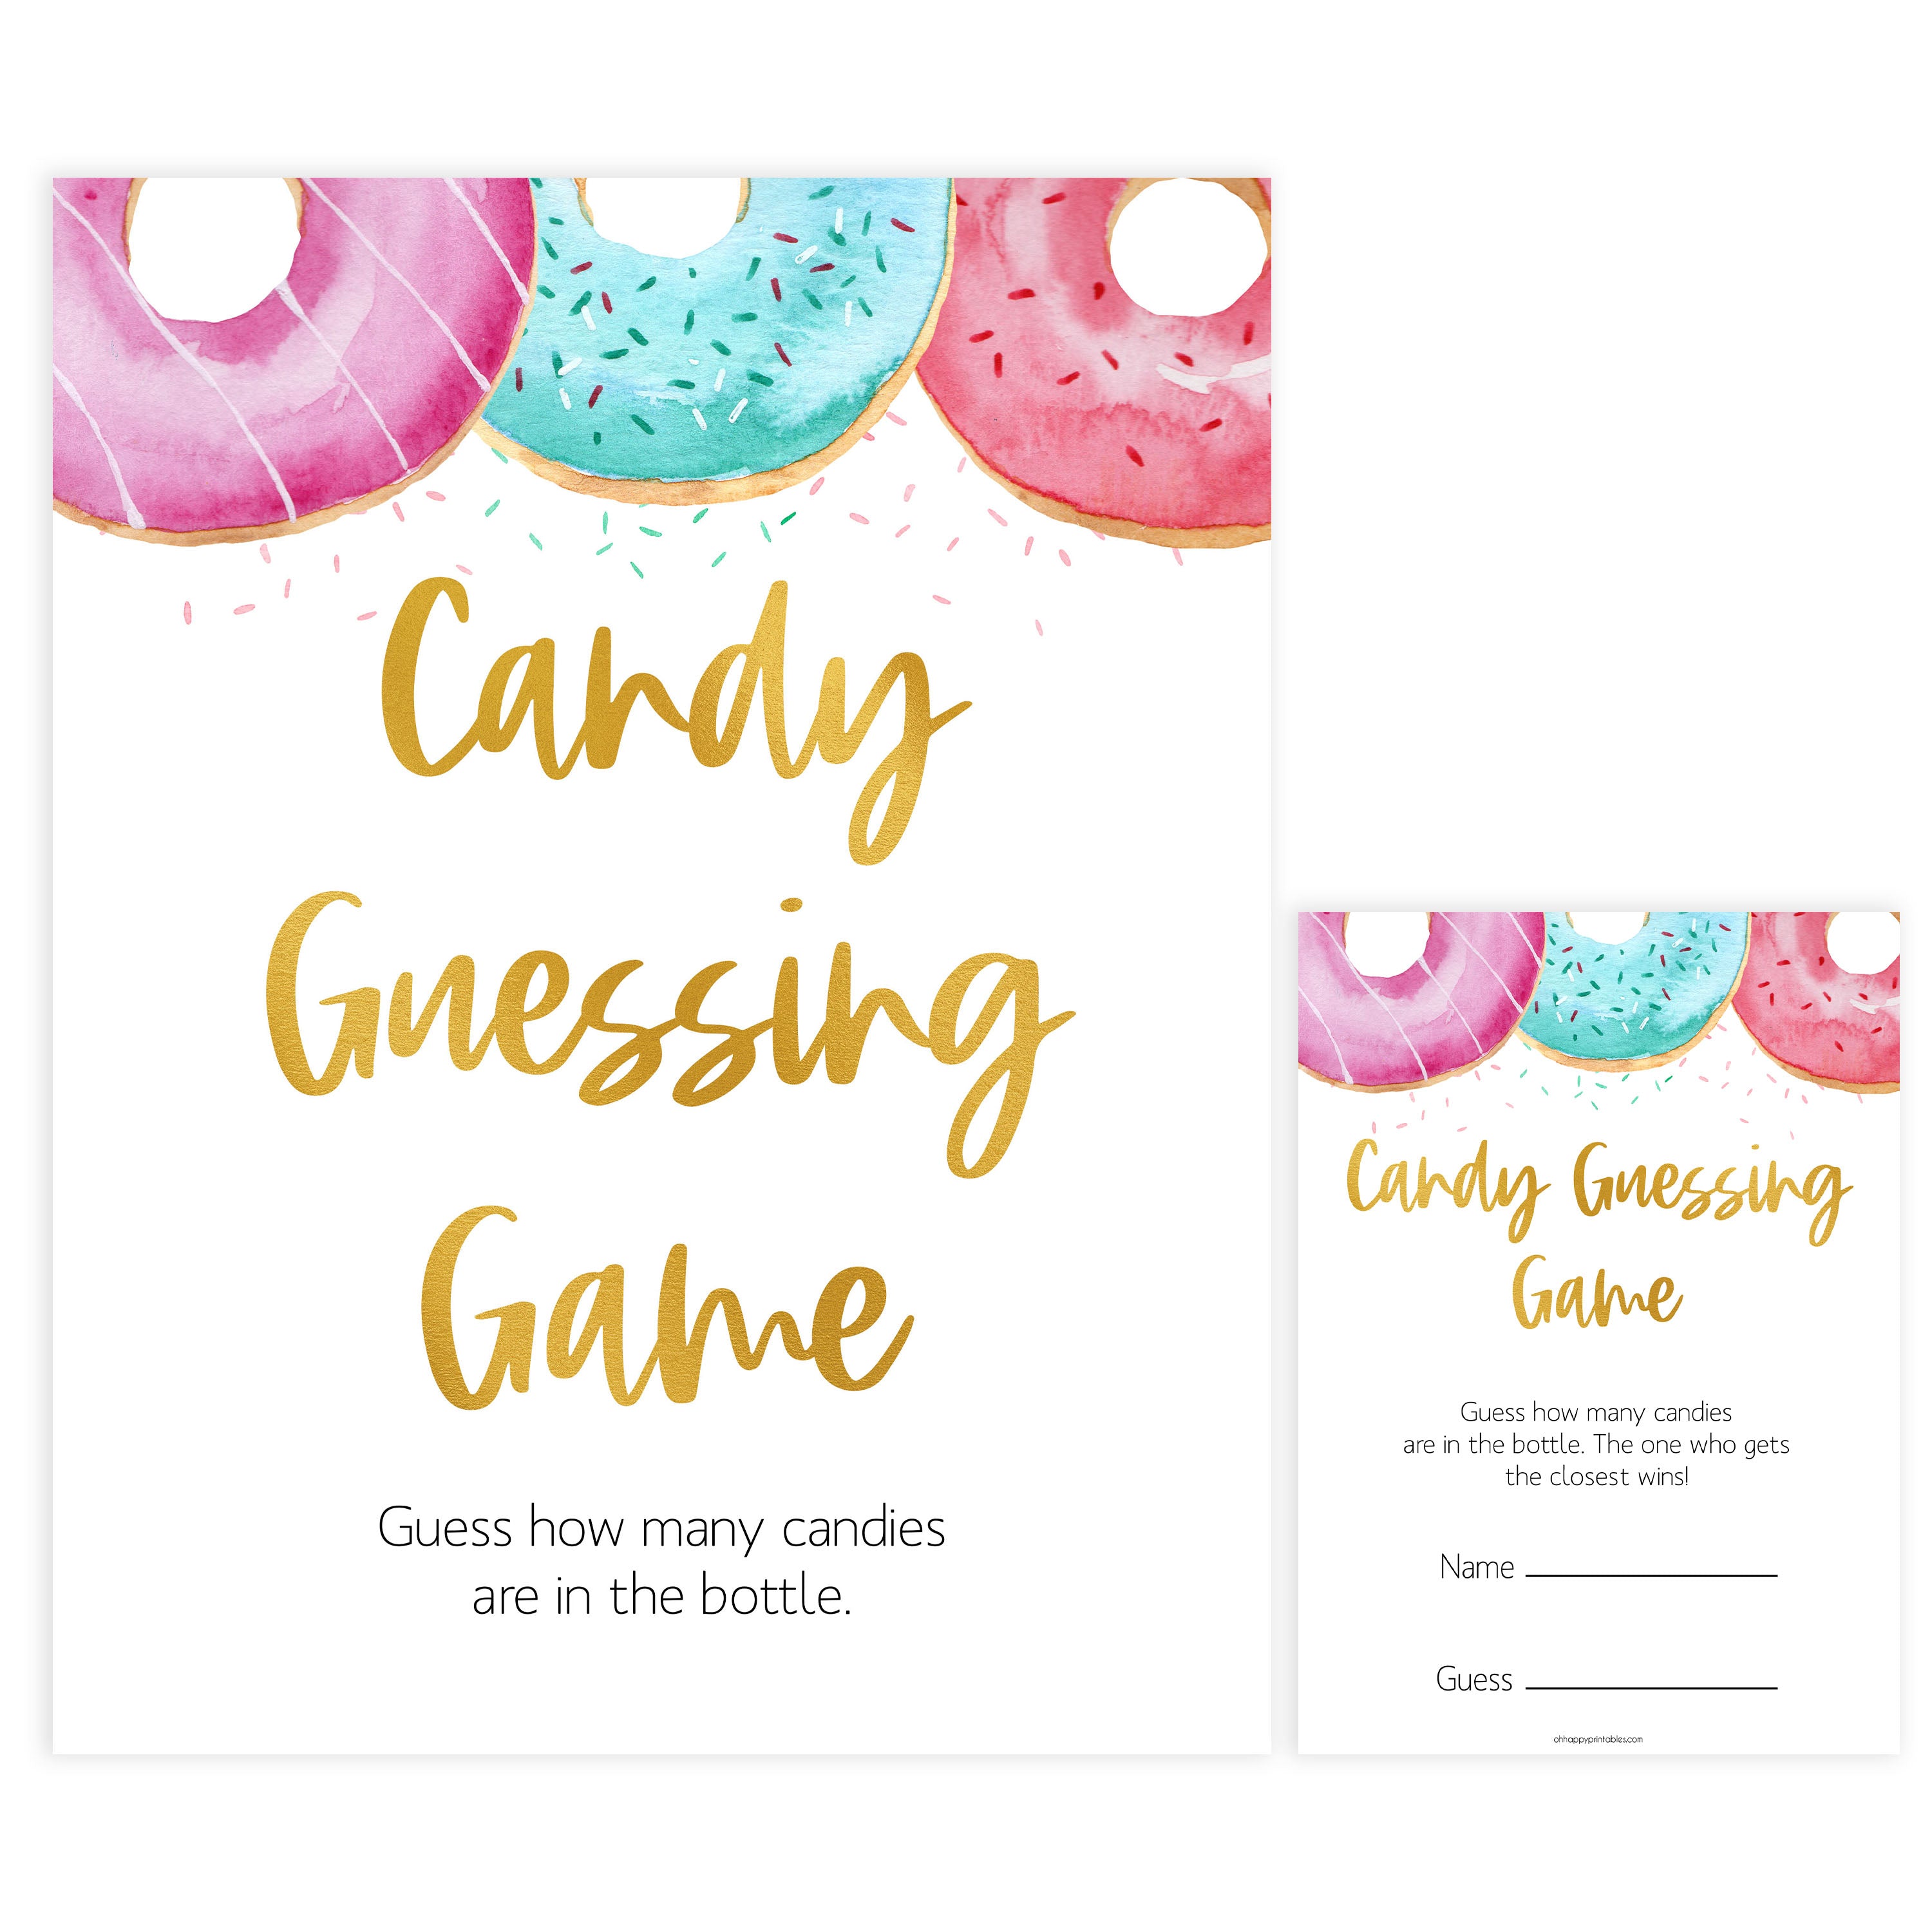 candy guessing game, Printable baby shower games, donut baby games, baby shower games, fun baby shower ideas, top baby shower ideas, donut sprinkles baby shower, baby shower games, fun donut baby shower ideas